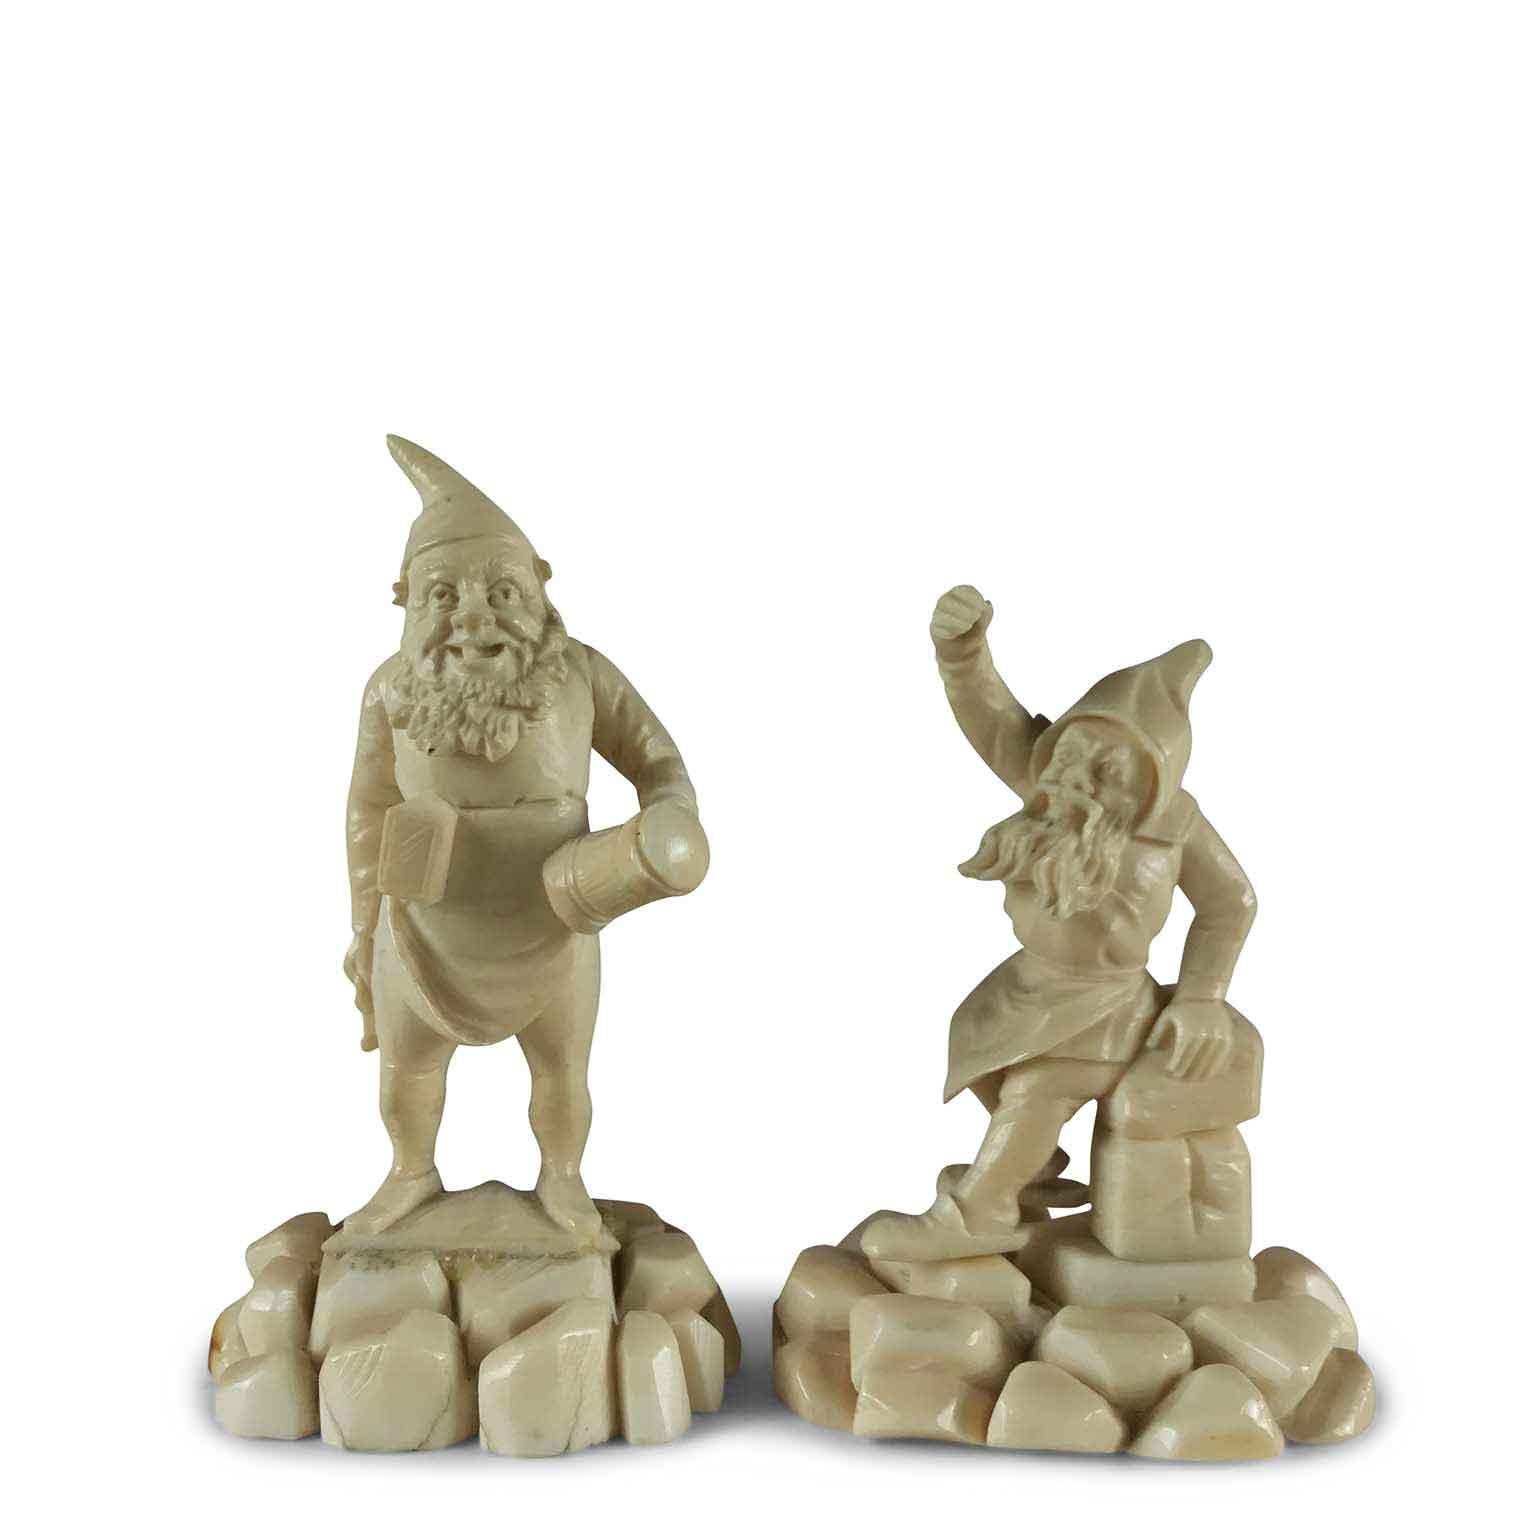 Lovely pair of cheerful gnome figurines carved bone gnomes of German origin dating back to the second half of the 19th century.
On a carved bone rocky pedestal, a standing smiling gnome holds a mug with a lid in one hand and a bunch of keys in the